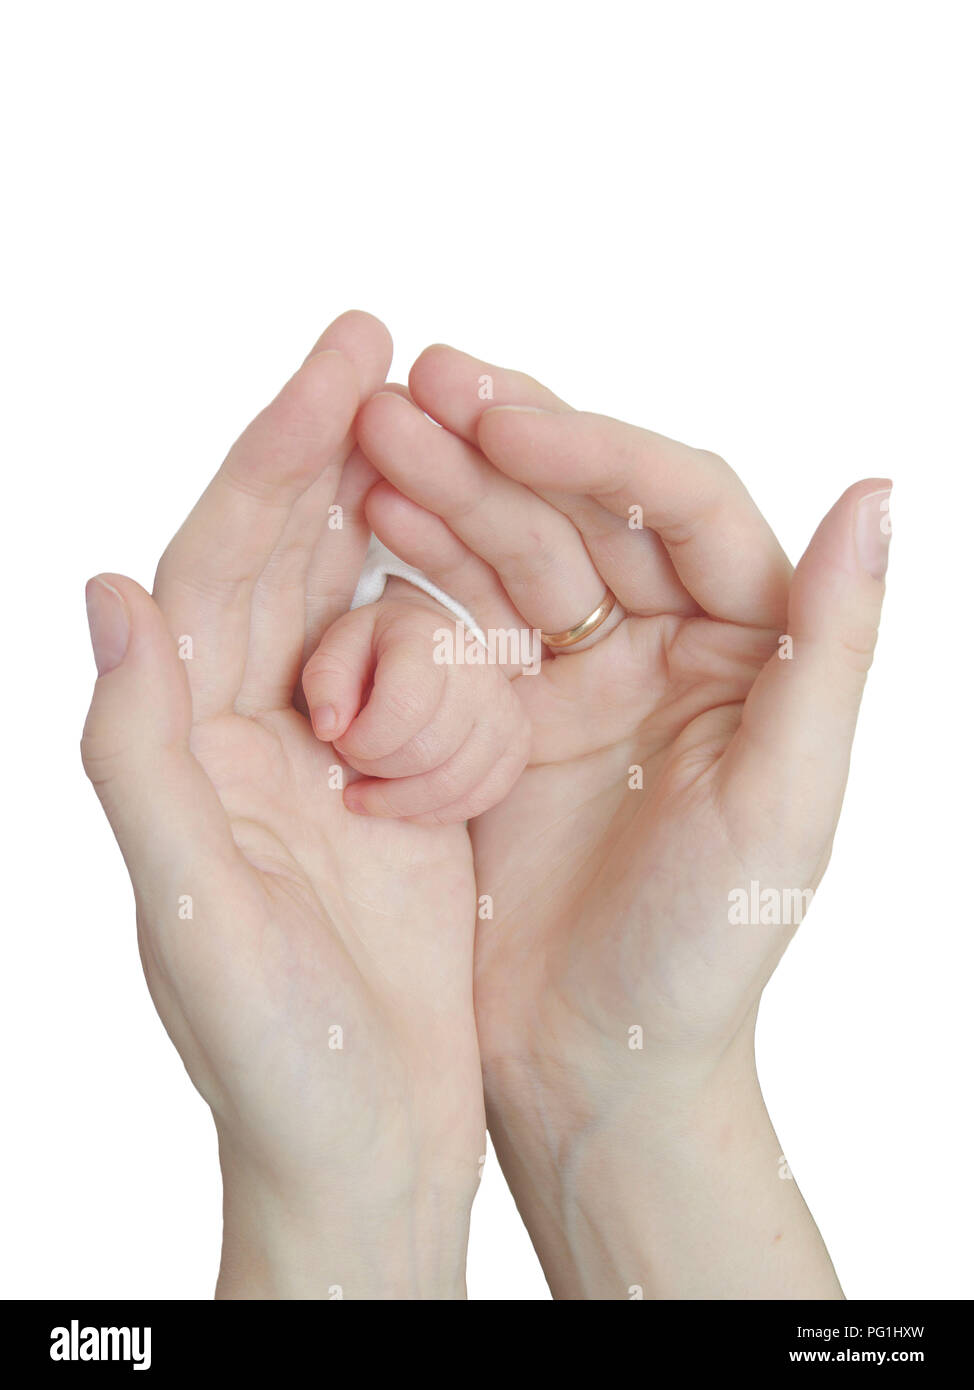 A hand of a mather and child isolated Stock Photo